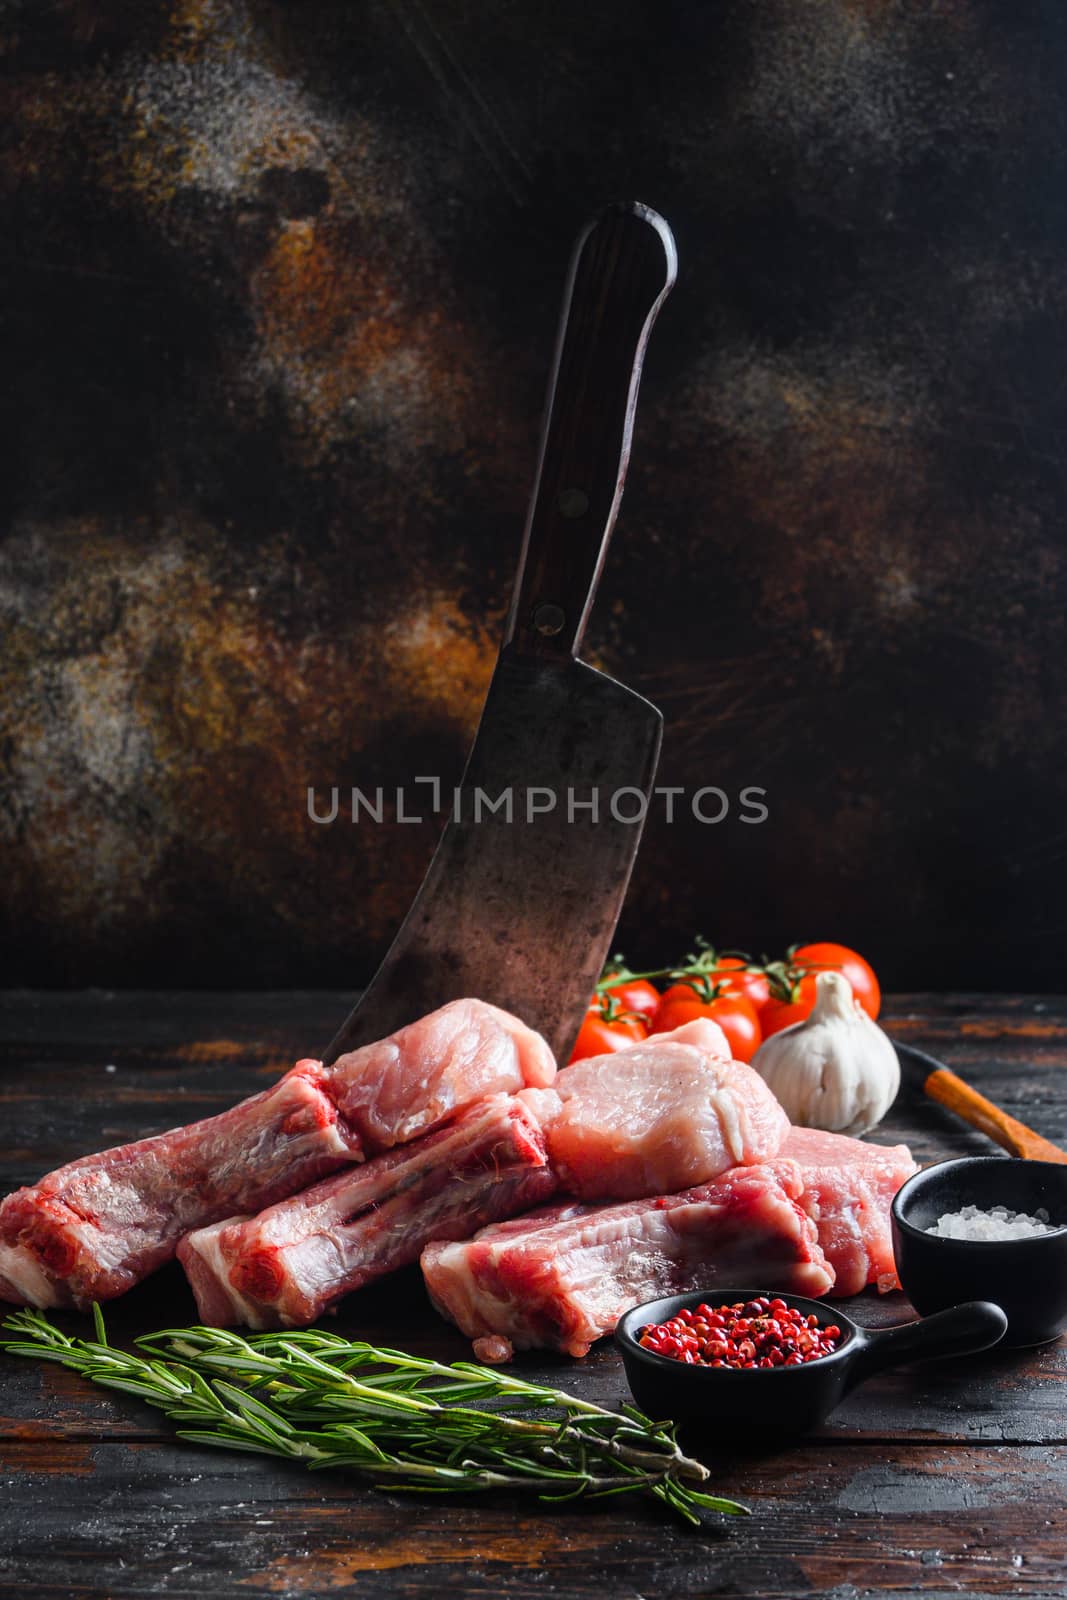 Fresh raw pork meat from organic farm with spices: pepper, salt, bay leaf. Butcher chopping cleaver in wood table over rustic wood and metal Food background side view by Ilianesolenyi